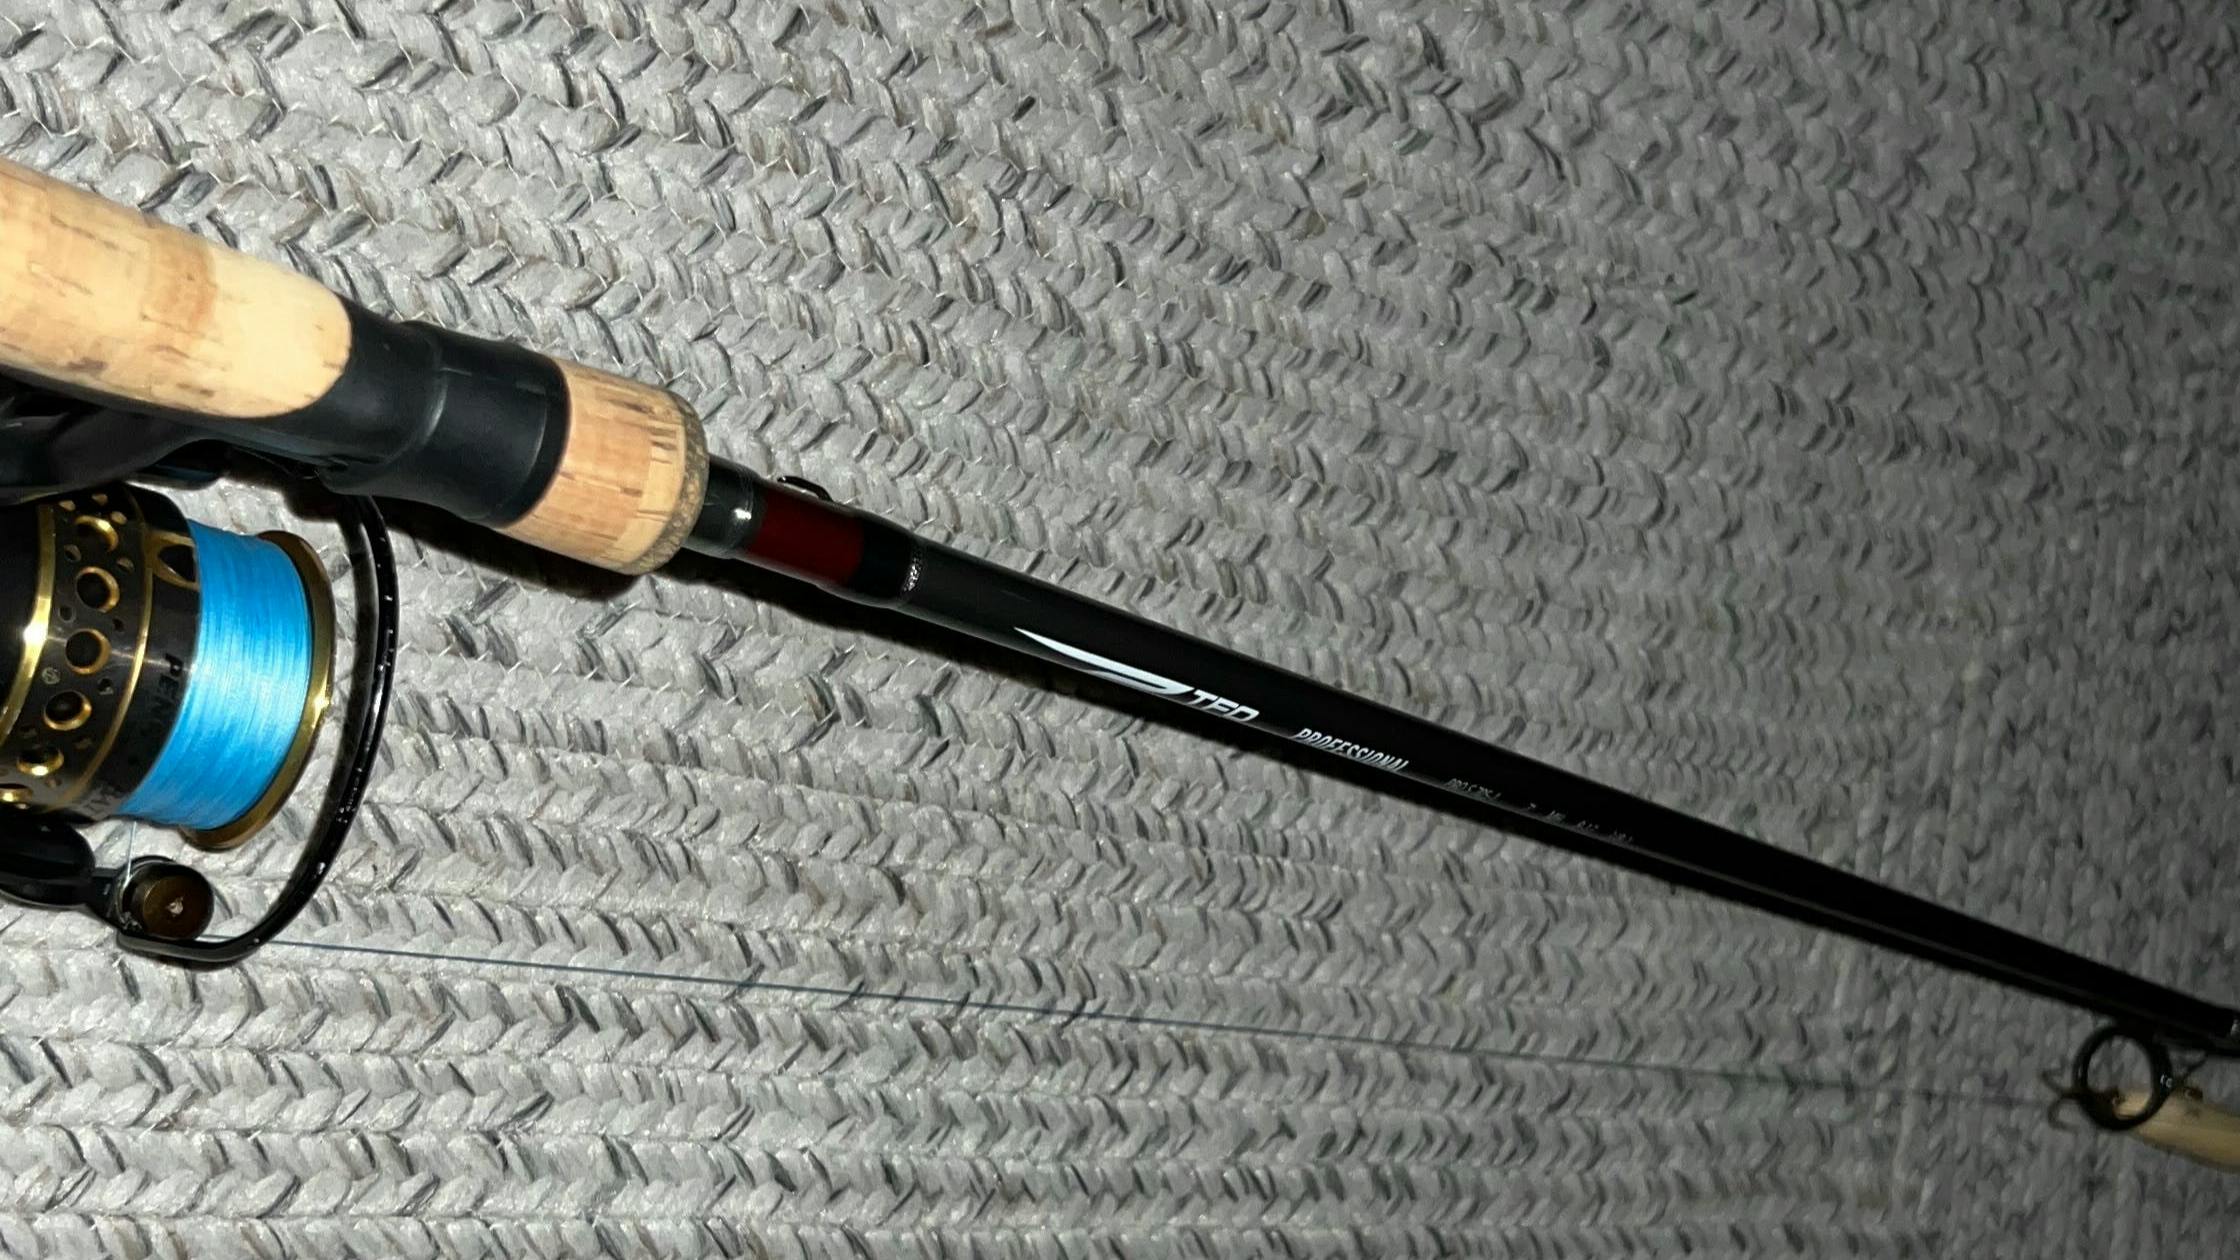 The Temple Fork Outfitters Professional Spinning Rod.